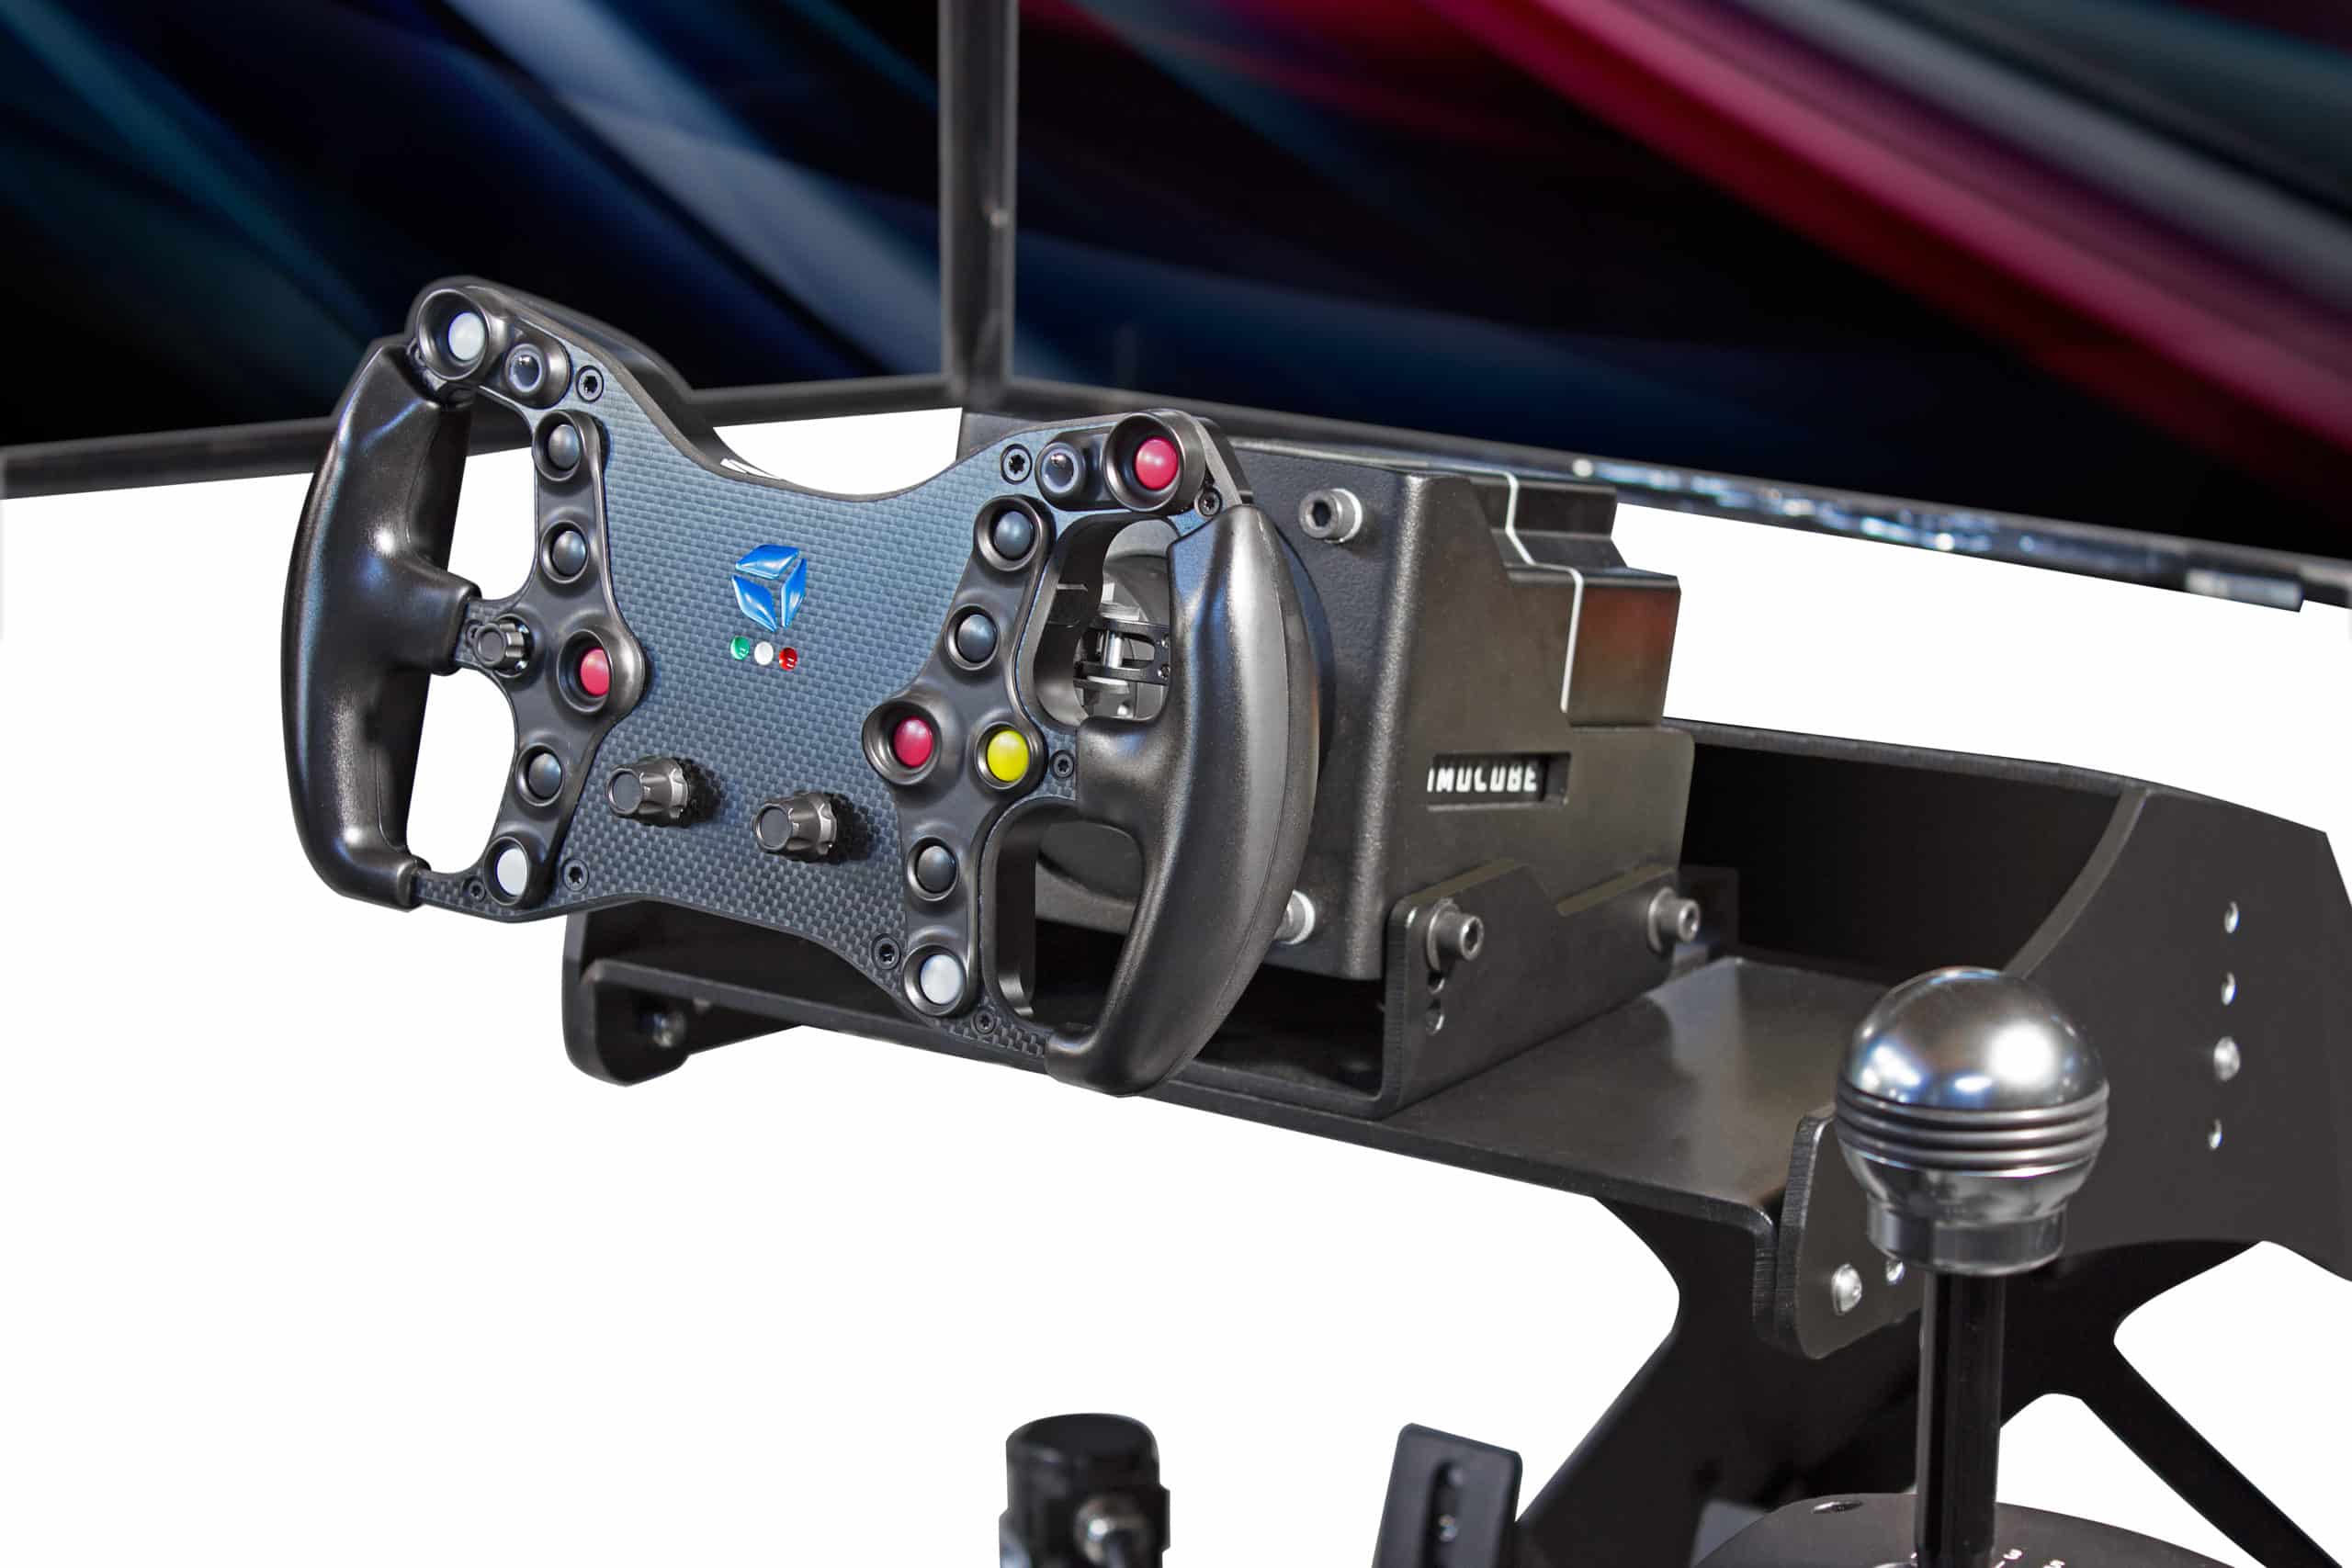 VRX simulators is an official Simucube reseller, distributing Simucube 2 Direct Drive force feedback wheelbases, such as Simucube 2 Sport, Pro and Ultimate wheelbase and othert Simucube accessories for sim racers and their racing simulators.